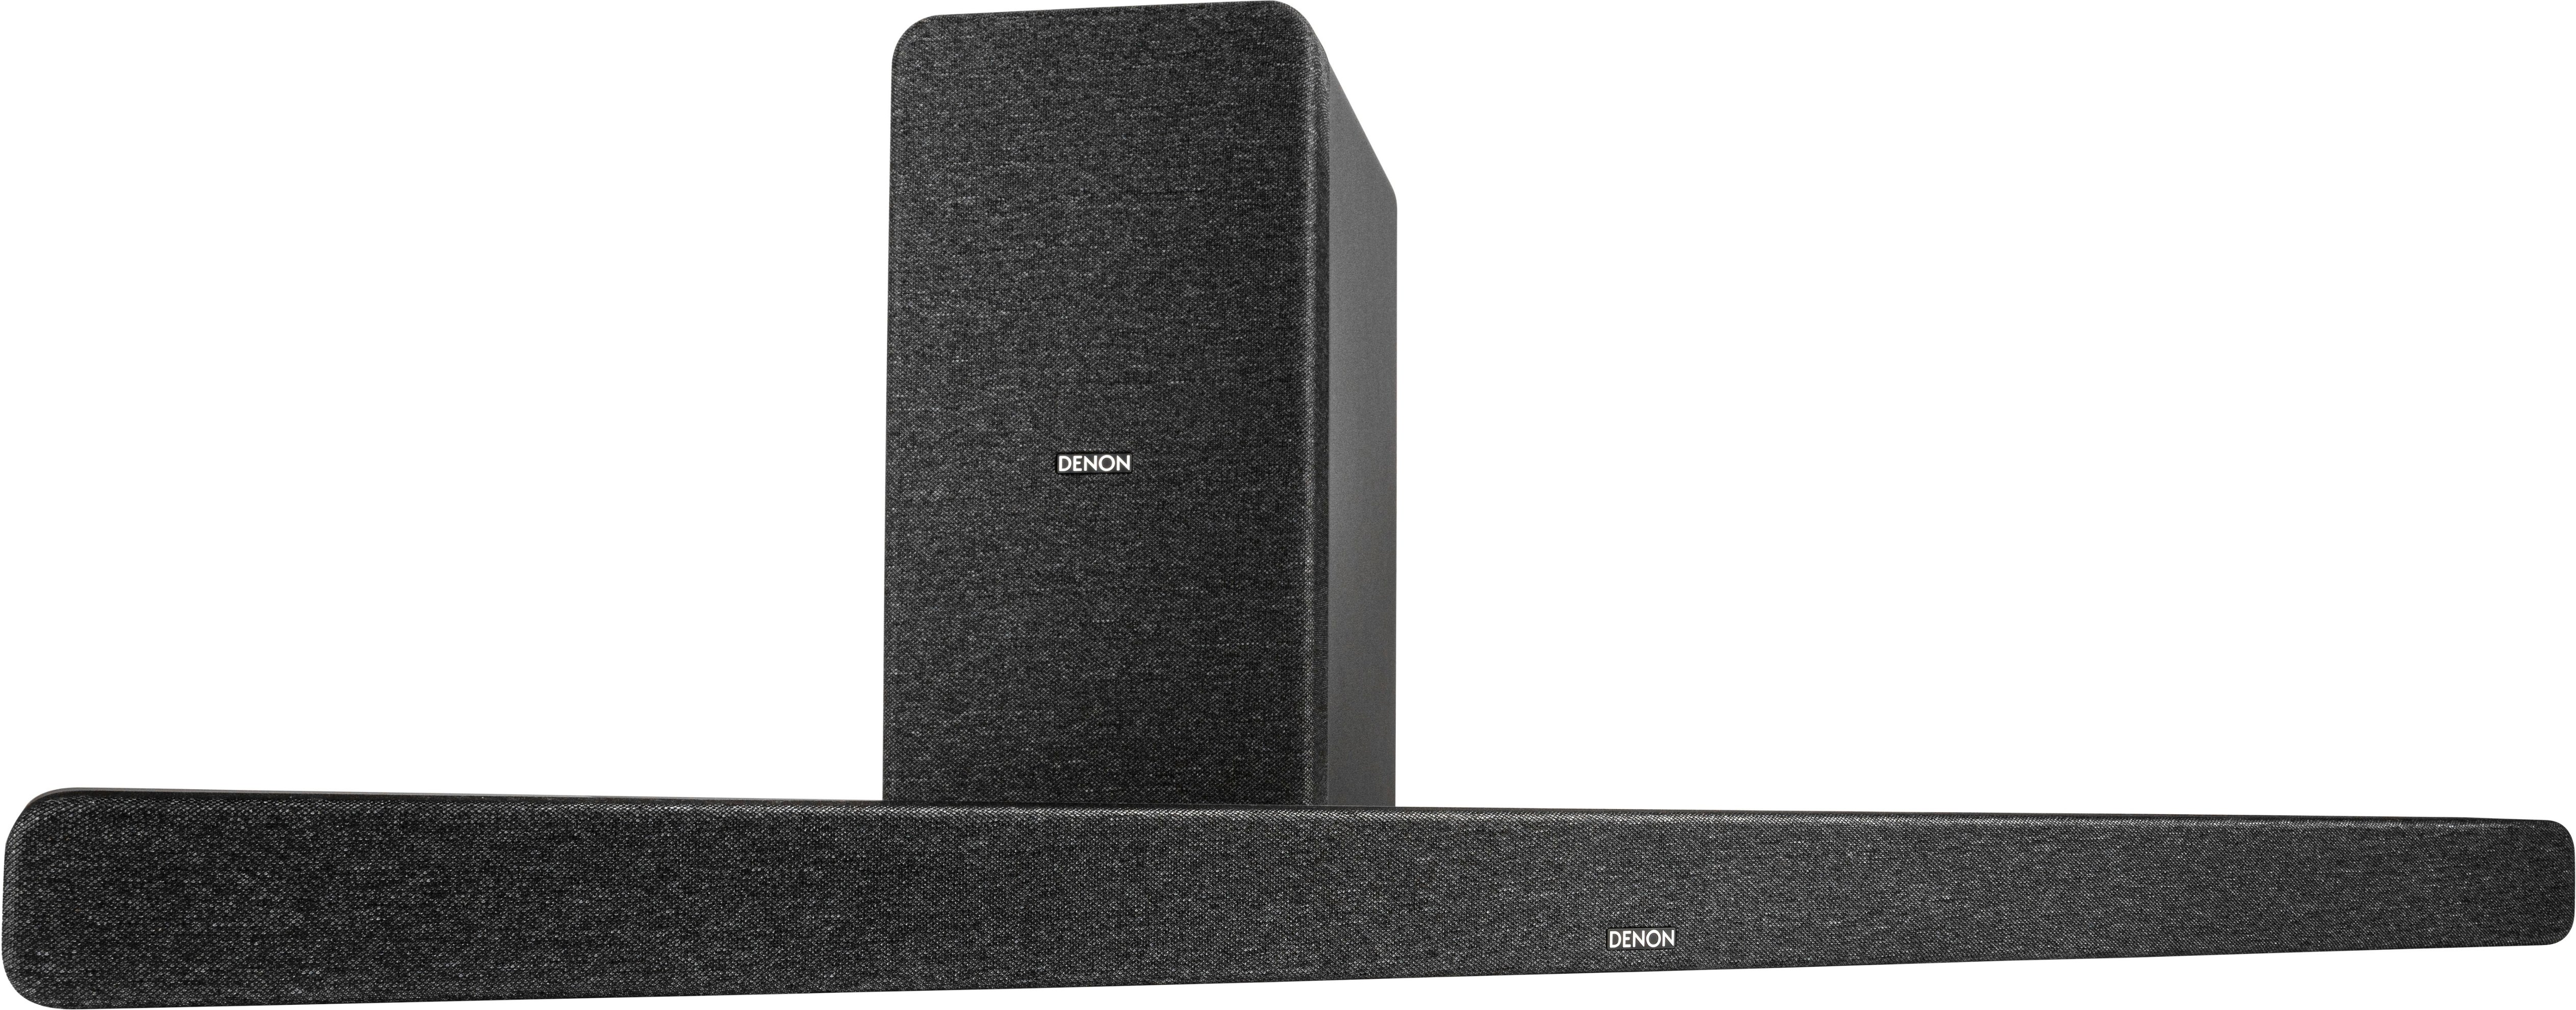 Denon DHT-S517 3.1.2 Ch Soundbar with Wireless Subwoofer and